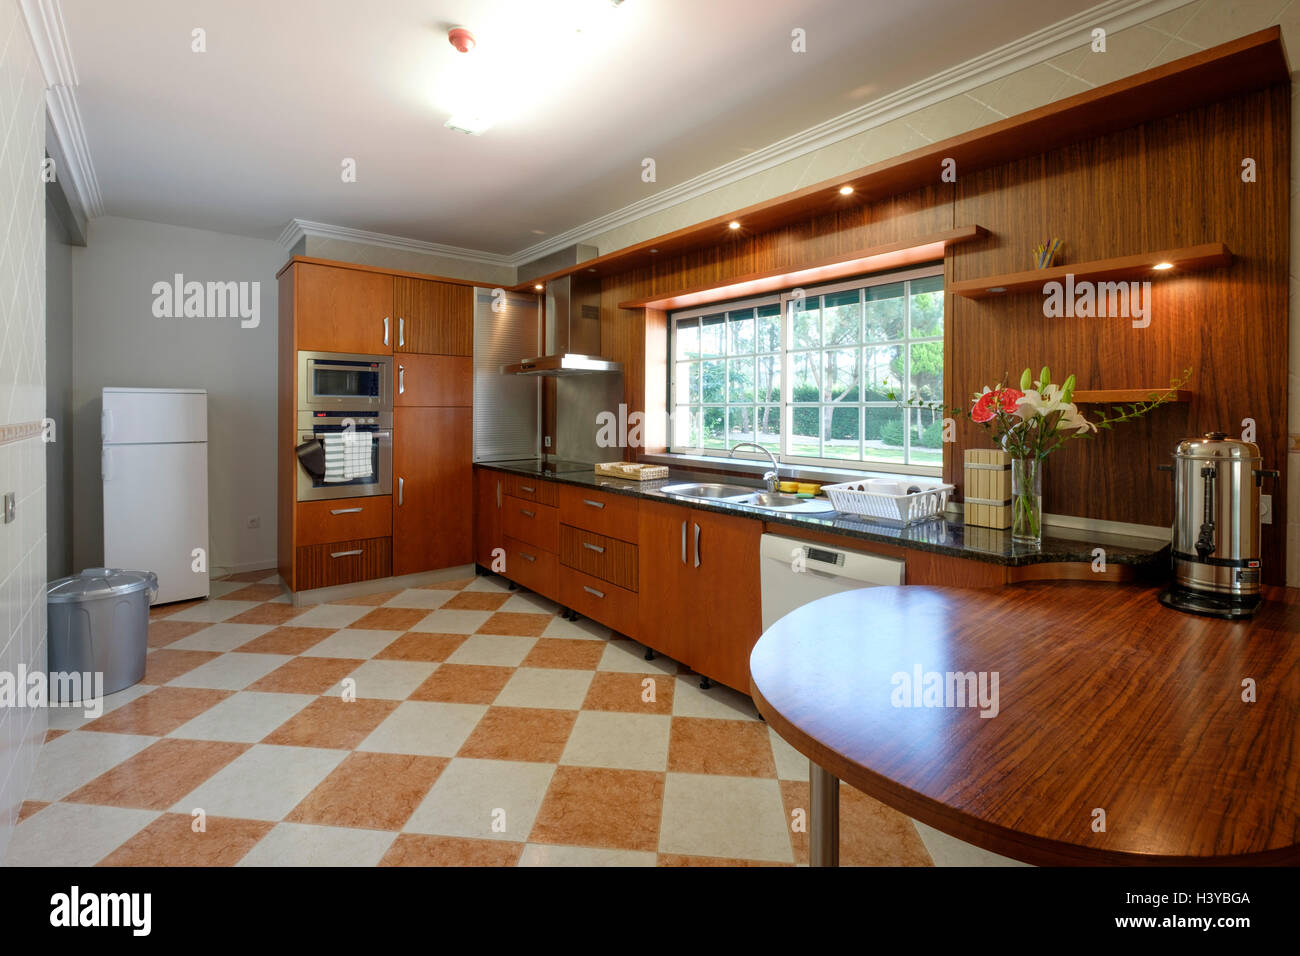 Modern kitchen interior with wooden cabinets Stock Photo